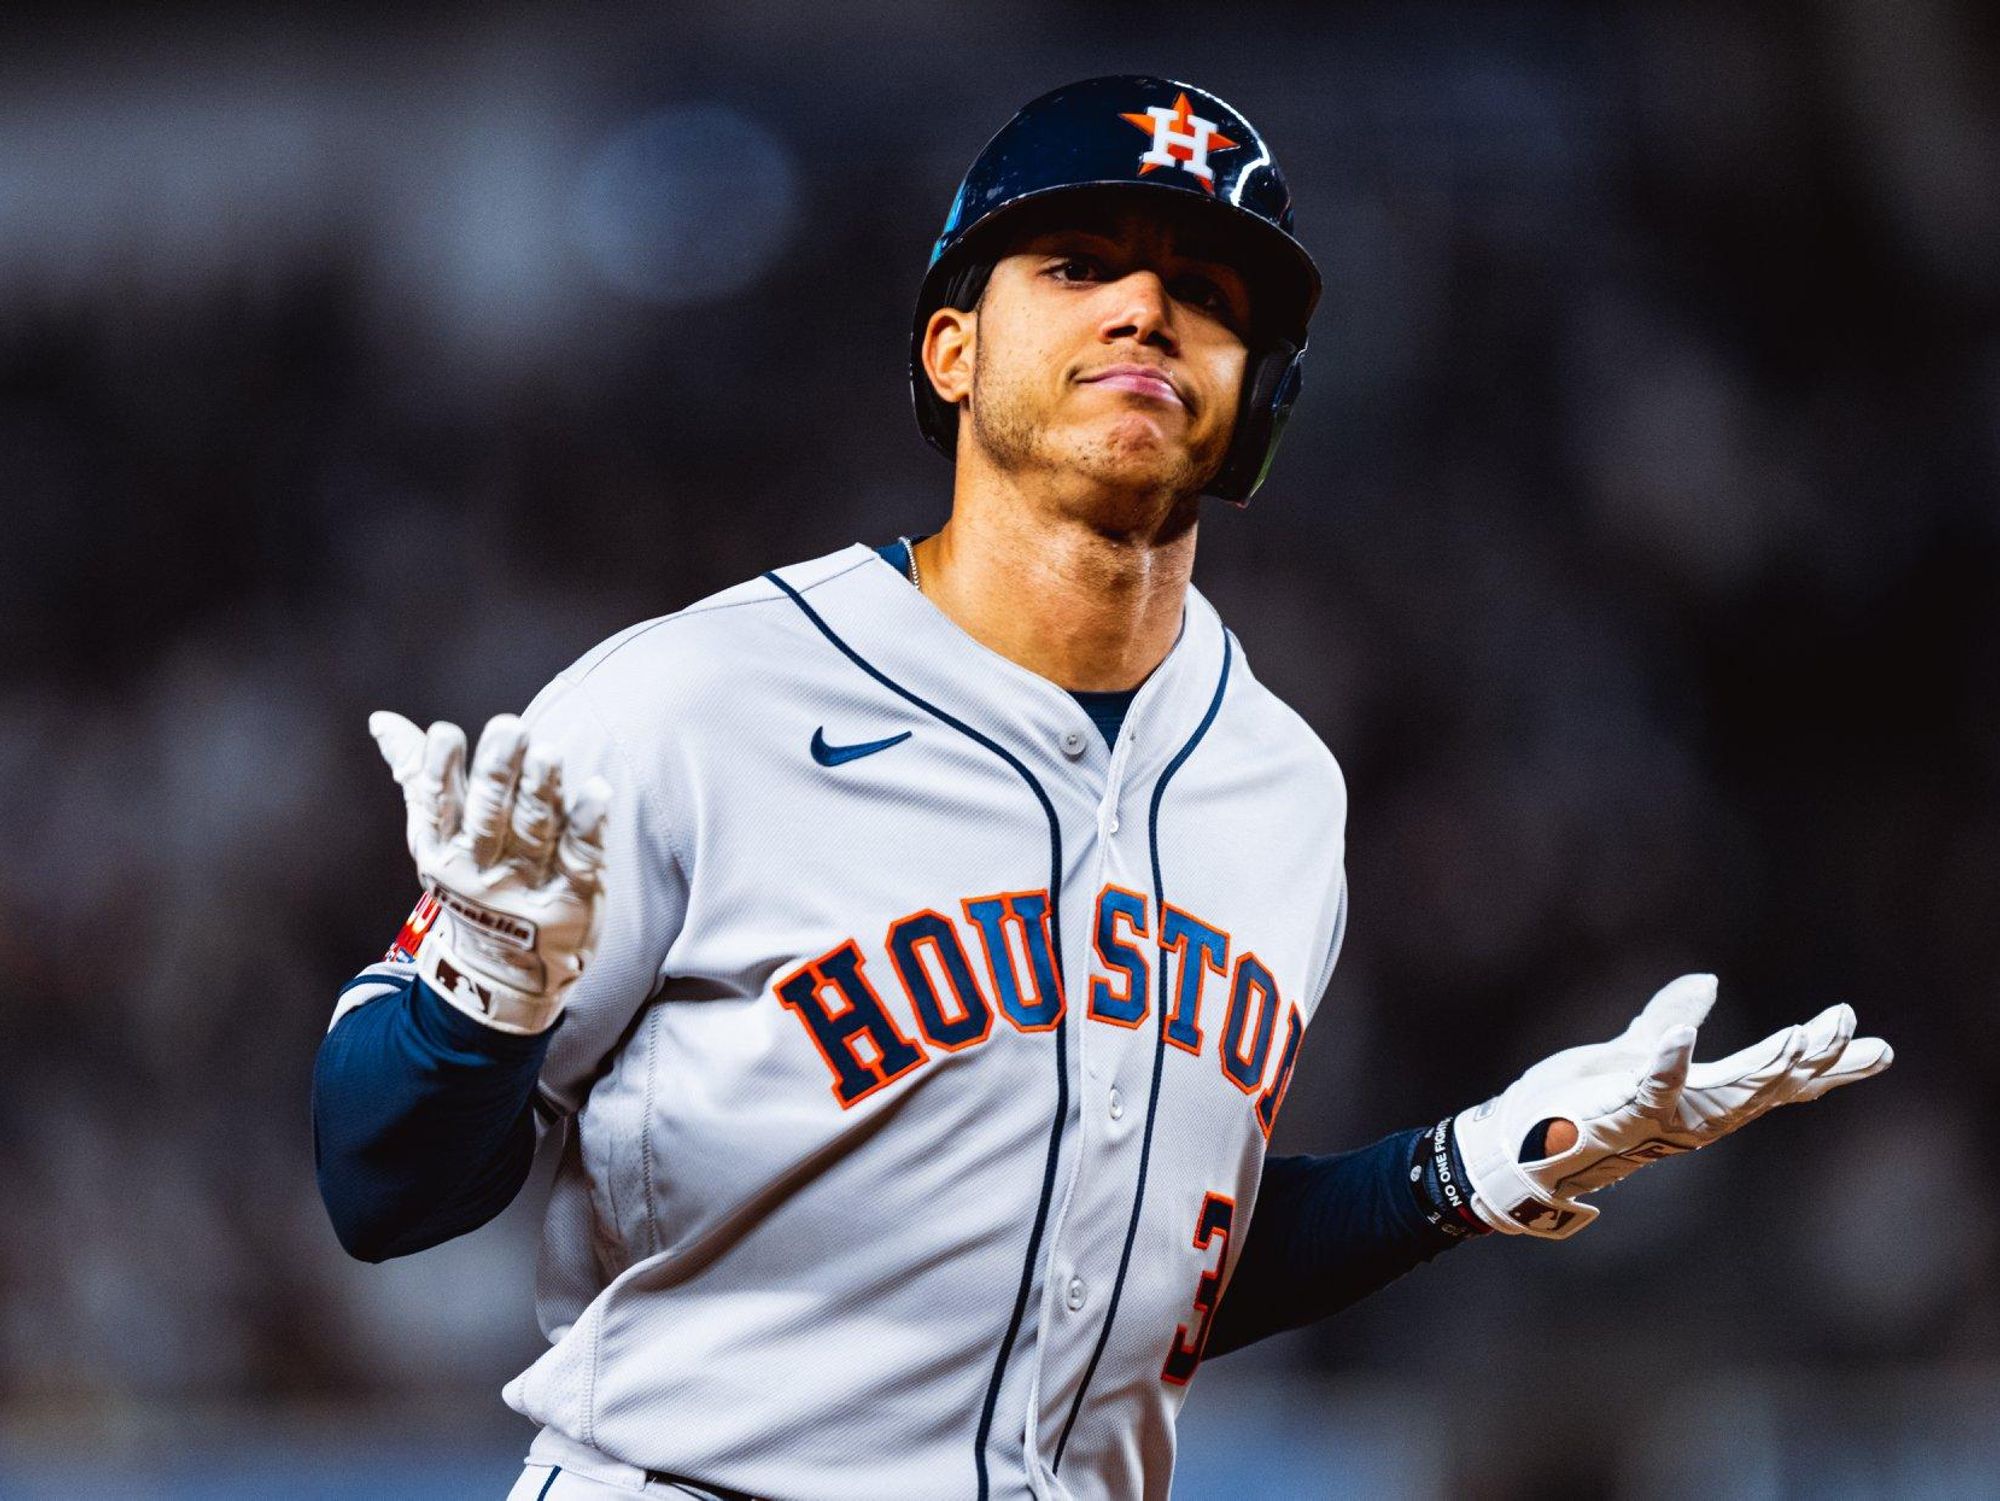 Sorry haters, here's why the Astros have cemented favorite status